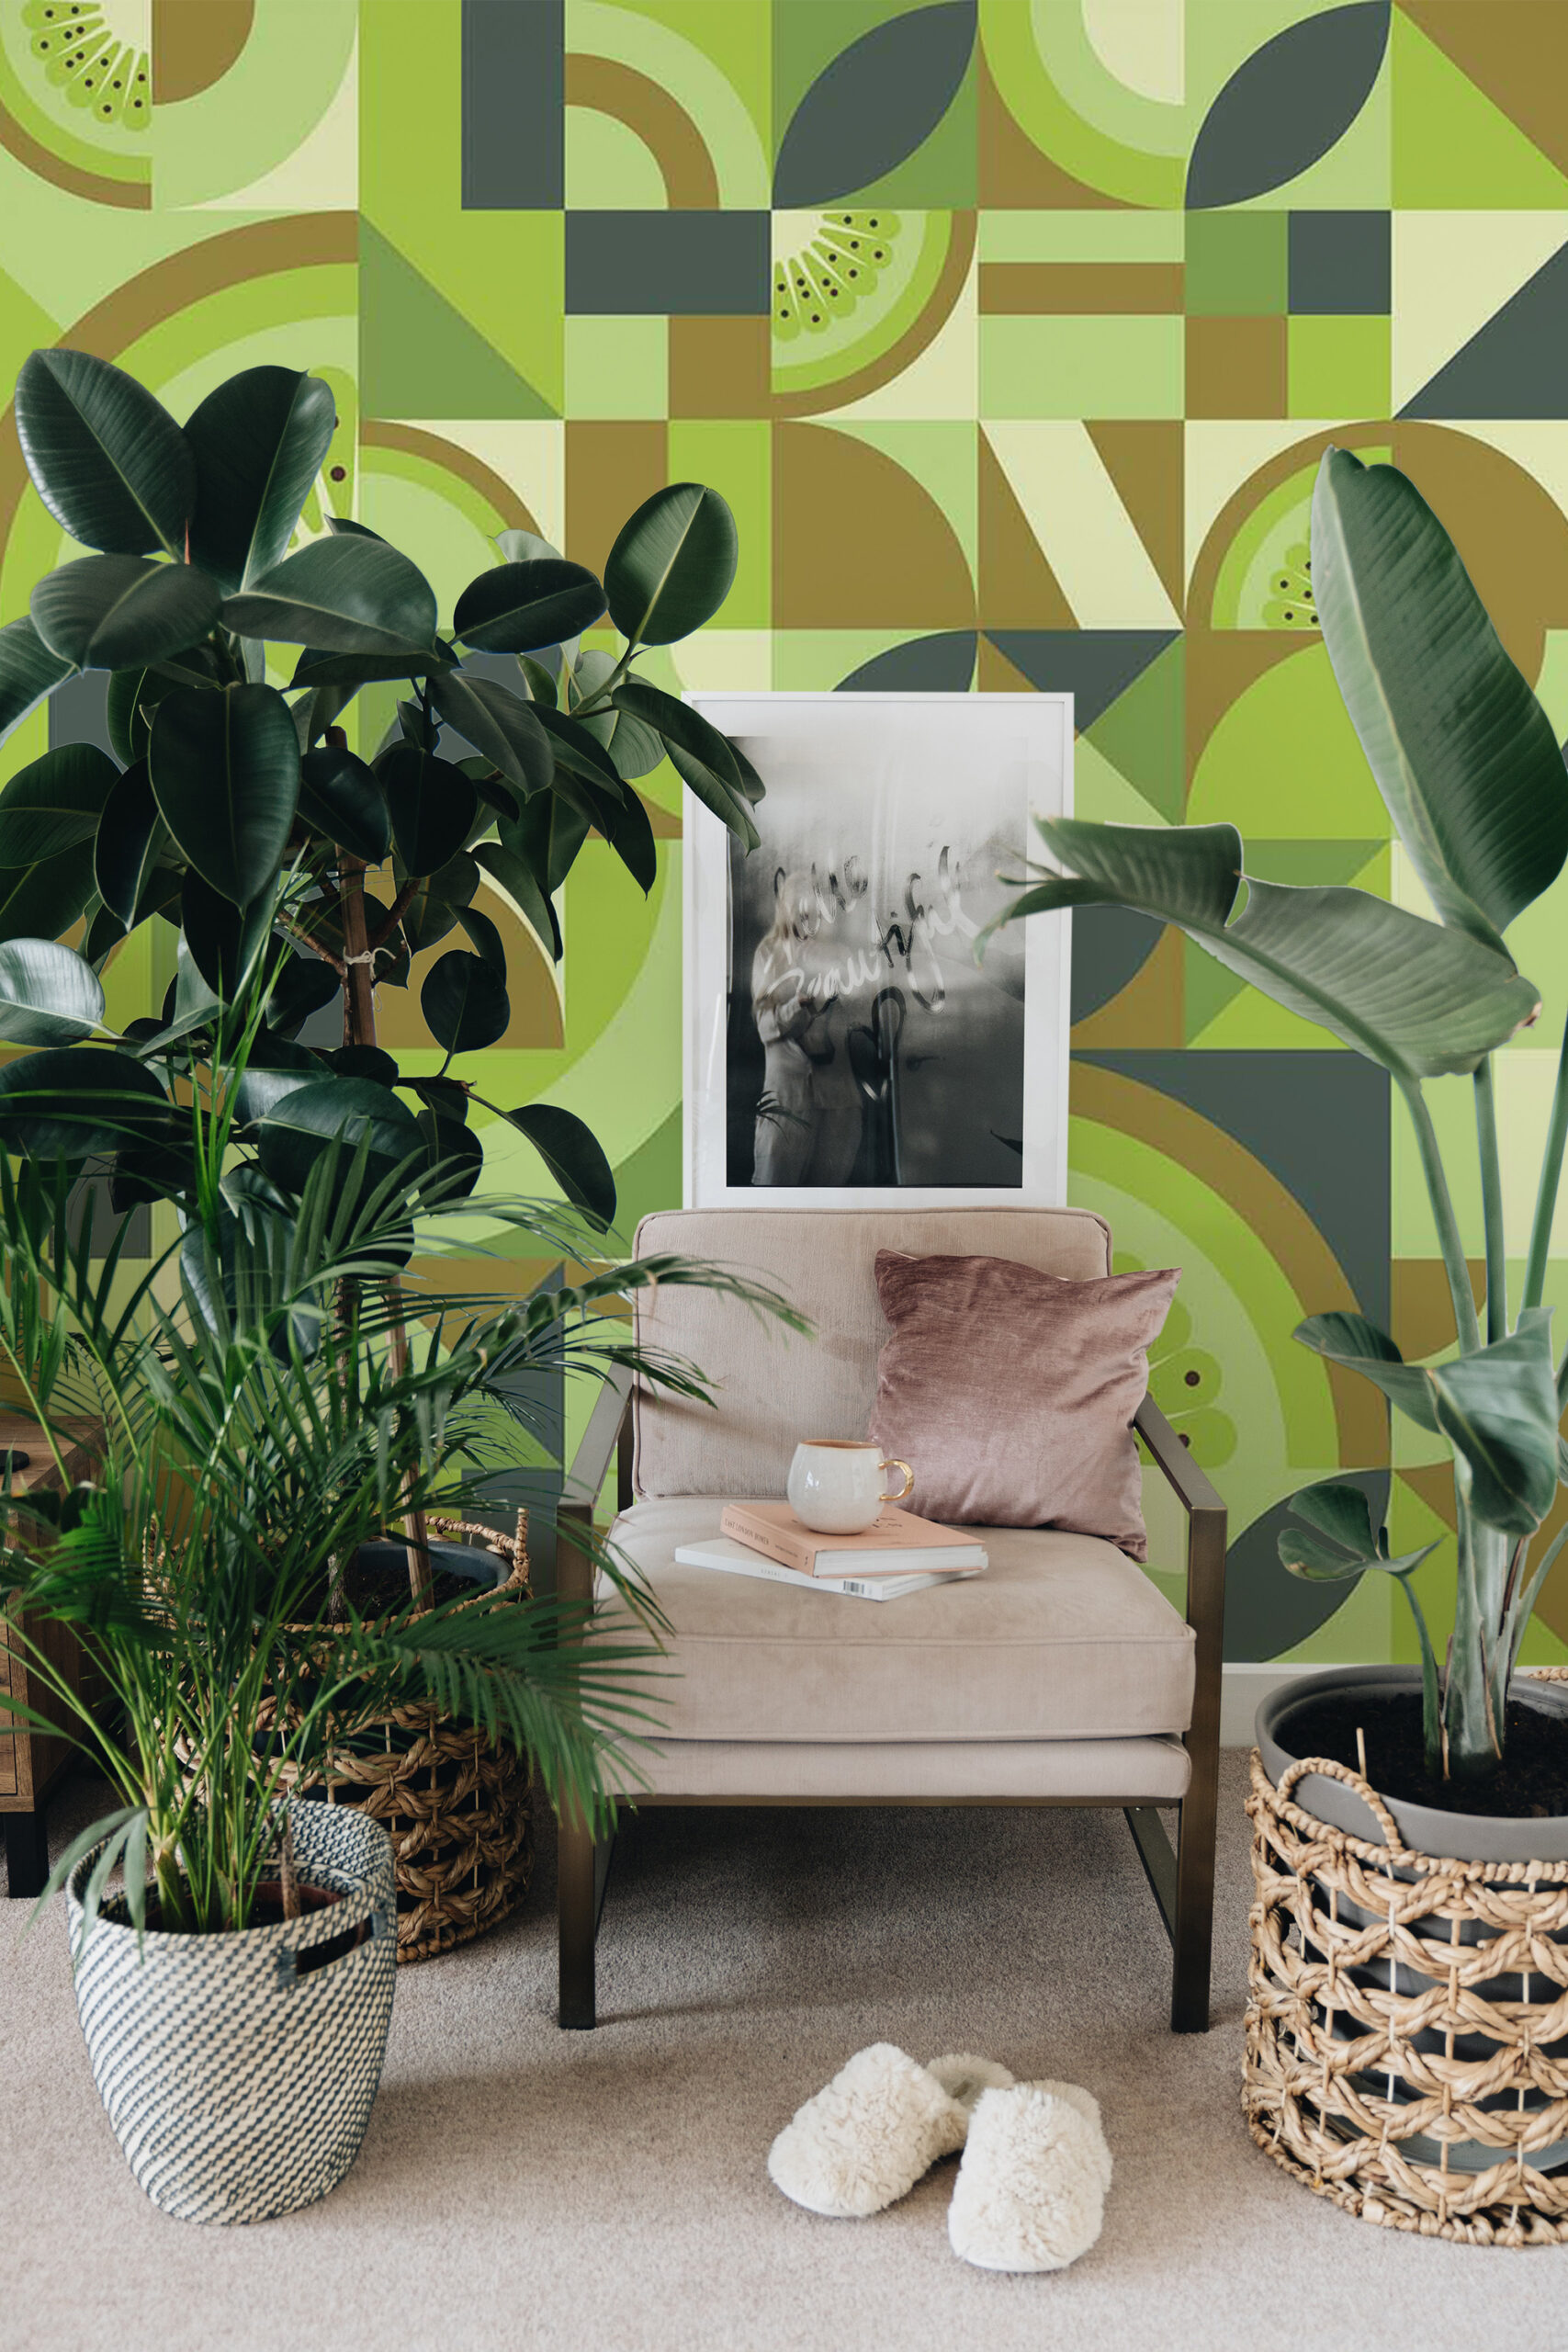 Removable Wall Mural - Green Kiwi Design from Fancy Walls